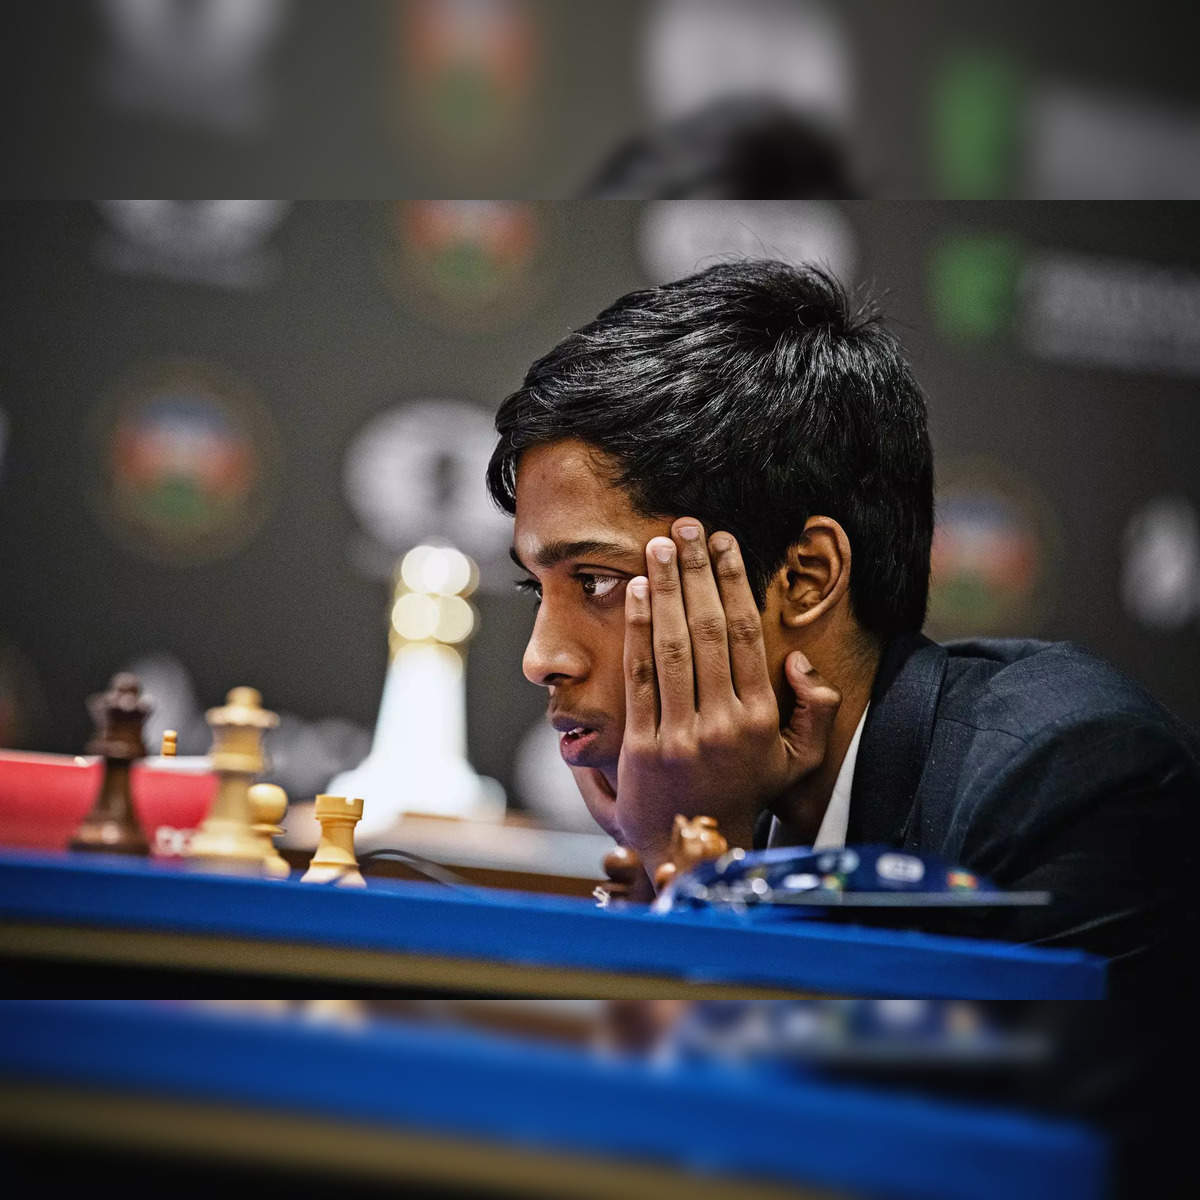 praggnanandhaa: Praggnanandhaa: From wonderkid to a chess great in the  waiting - The Economic Times